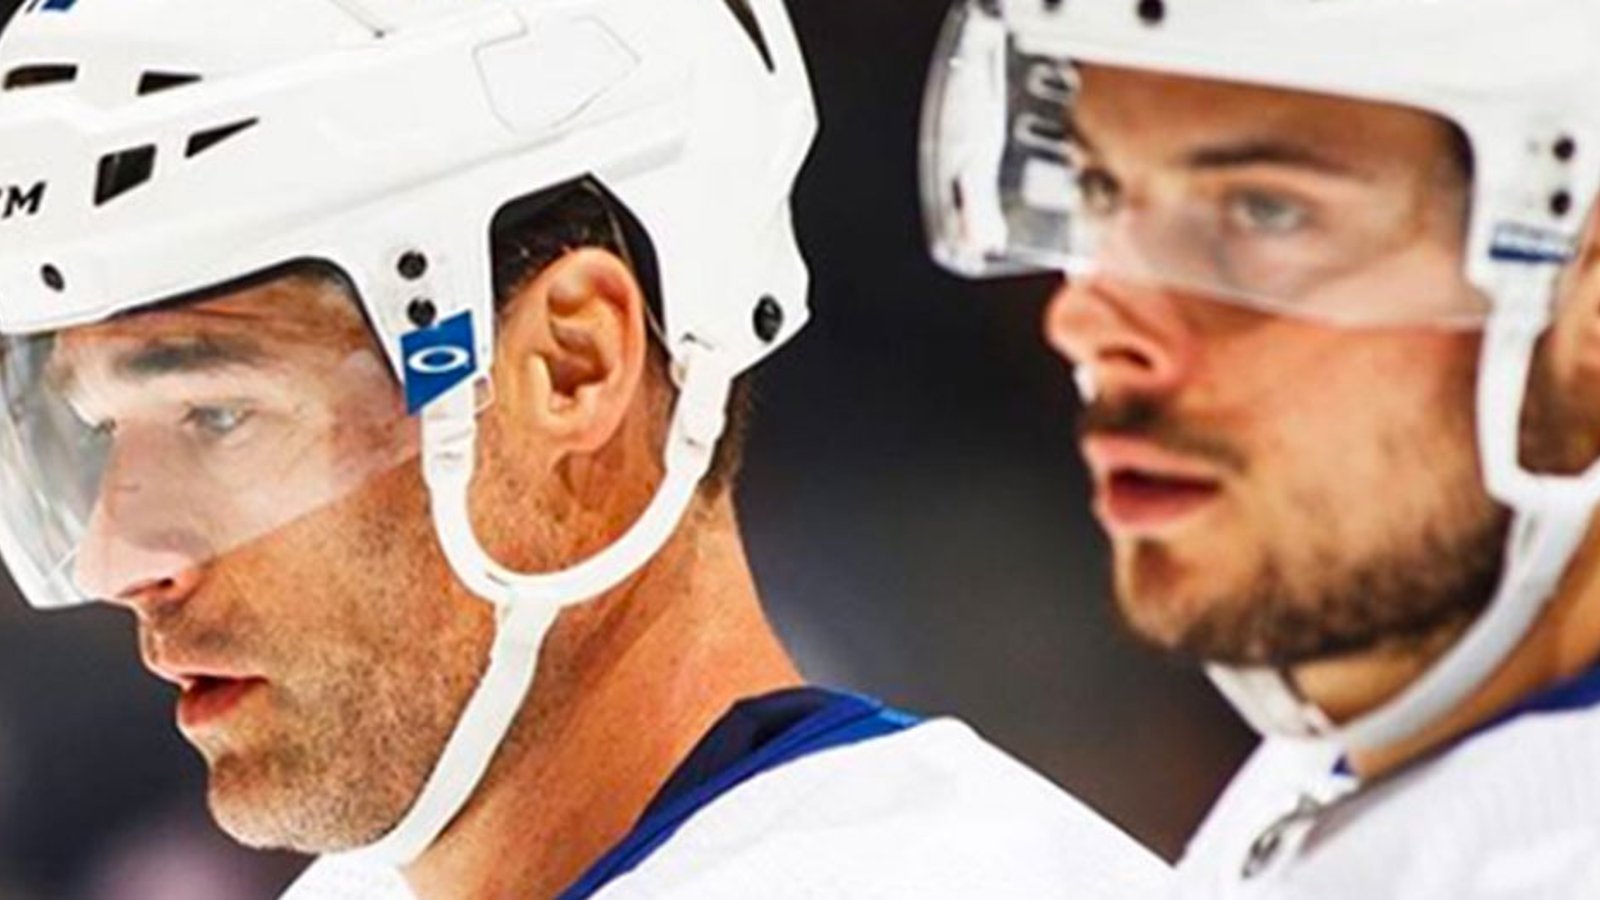 Matthews talked to Marleau this summer about disorderly conduct